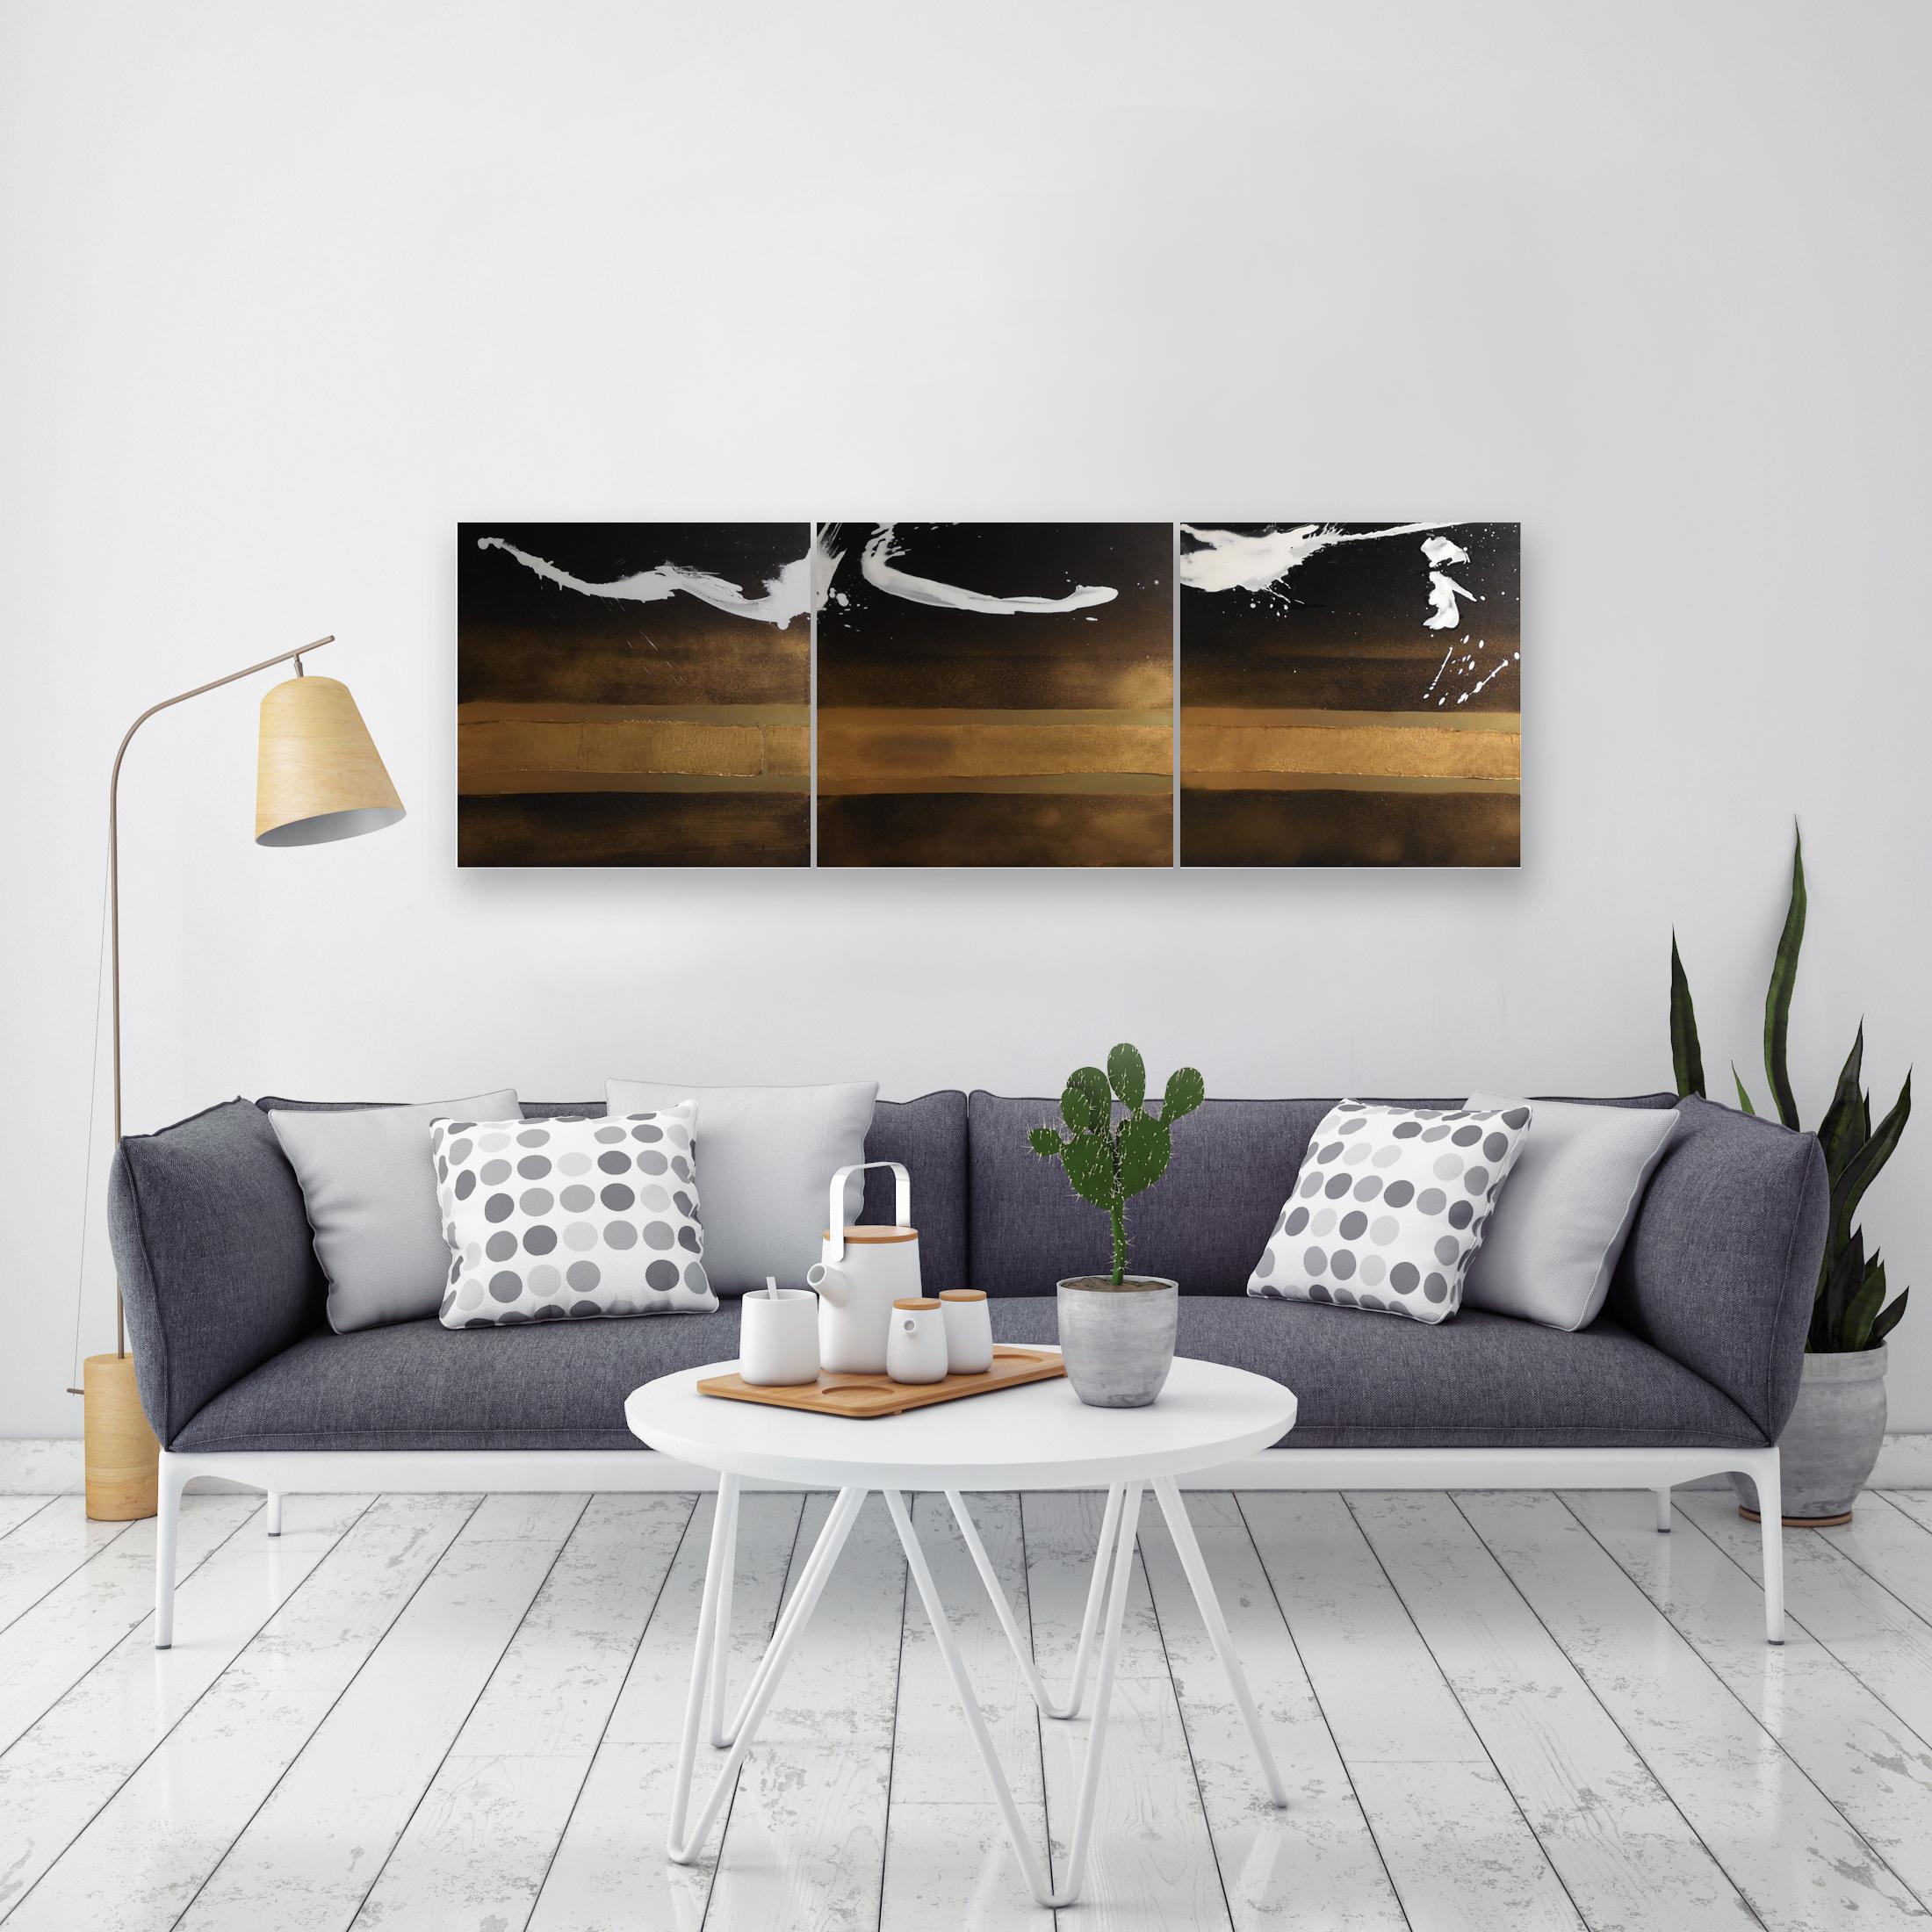 Elan I, II & III is a triptych. Gallery wrapped canvas, wired and ready to hang. Can be purchased individually also.
     
Karen was born in 1946 to an American family in a small town in Connecticut where she was inspired to create artwork by her